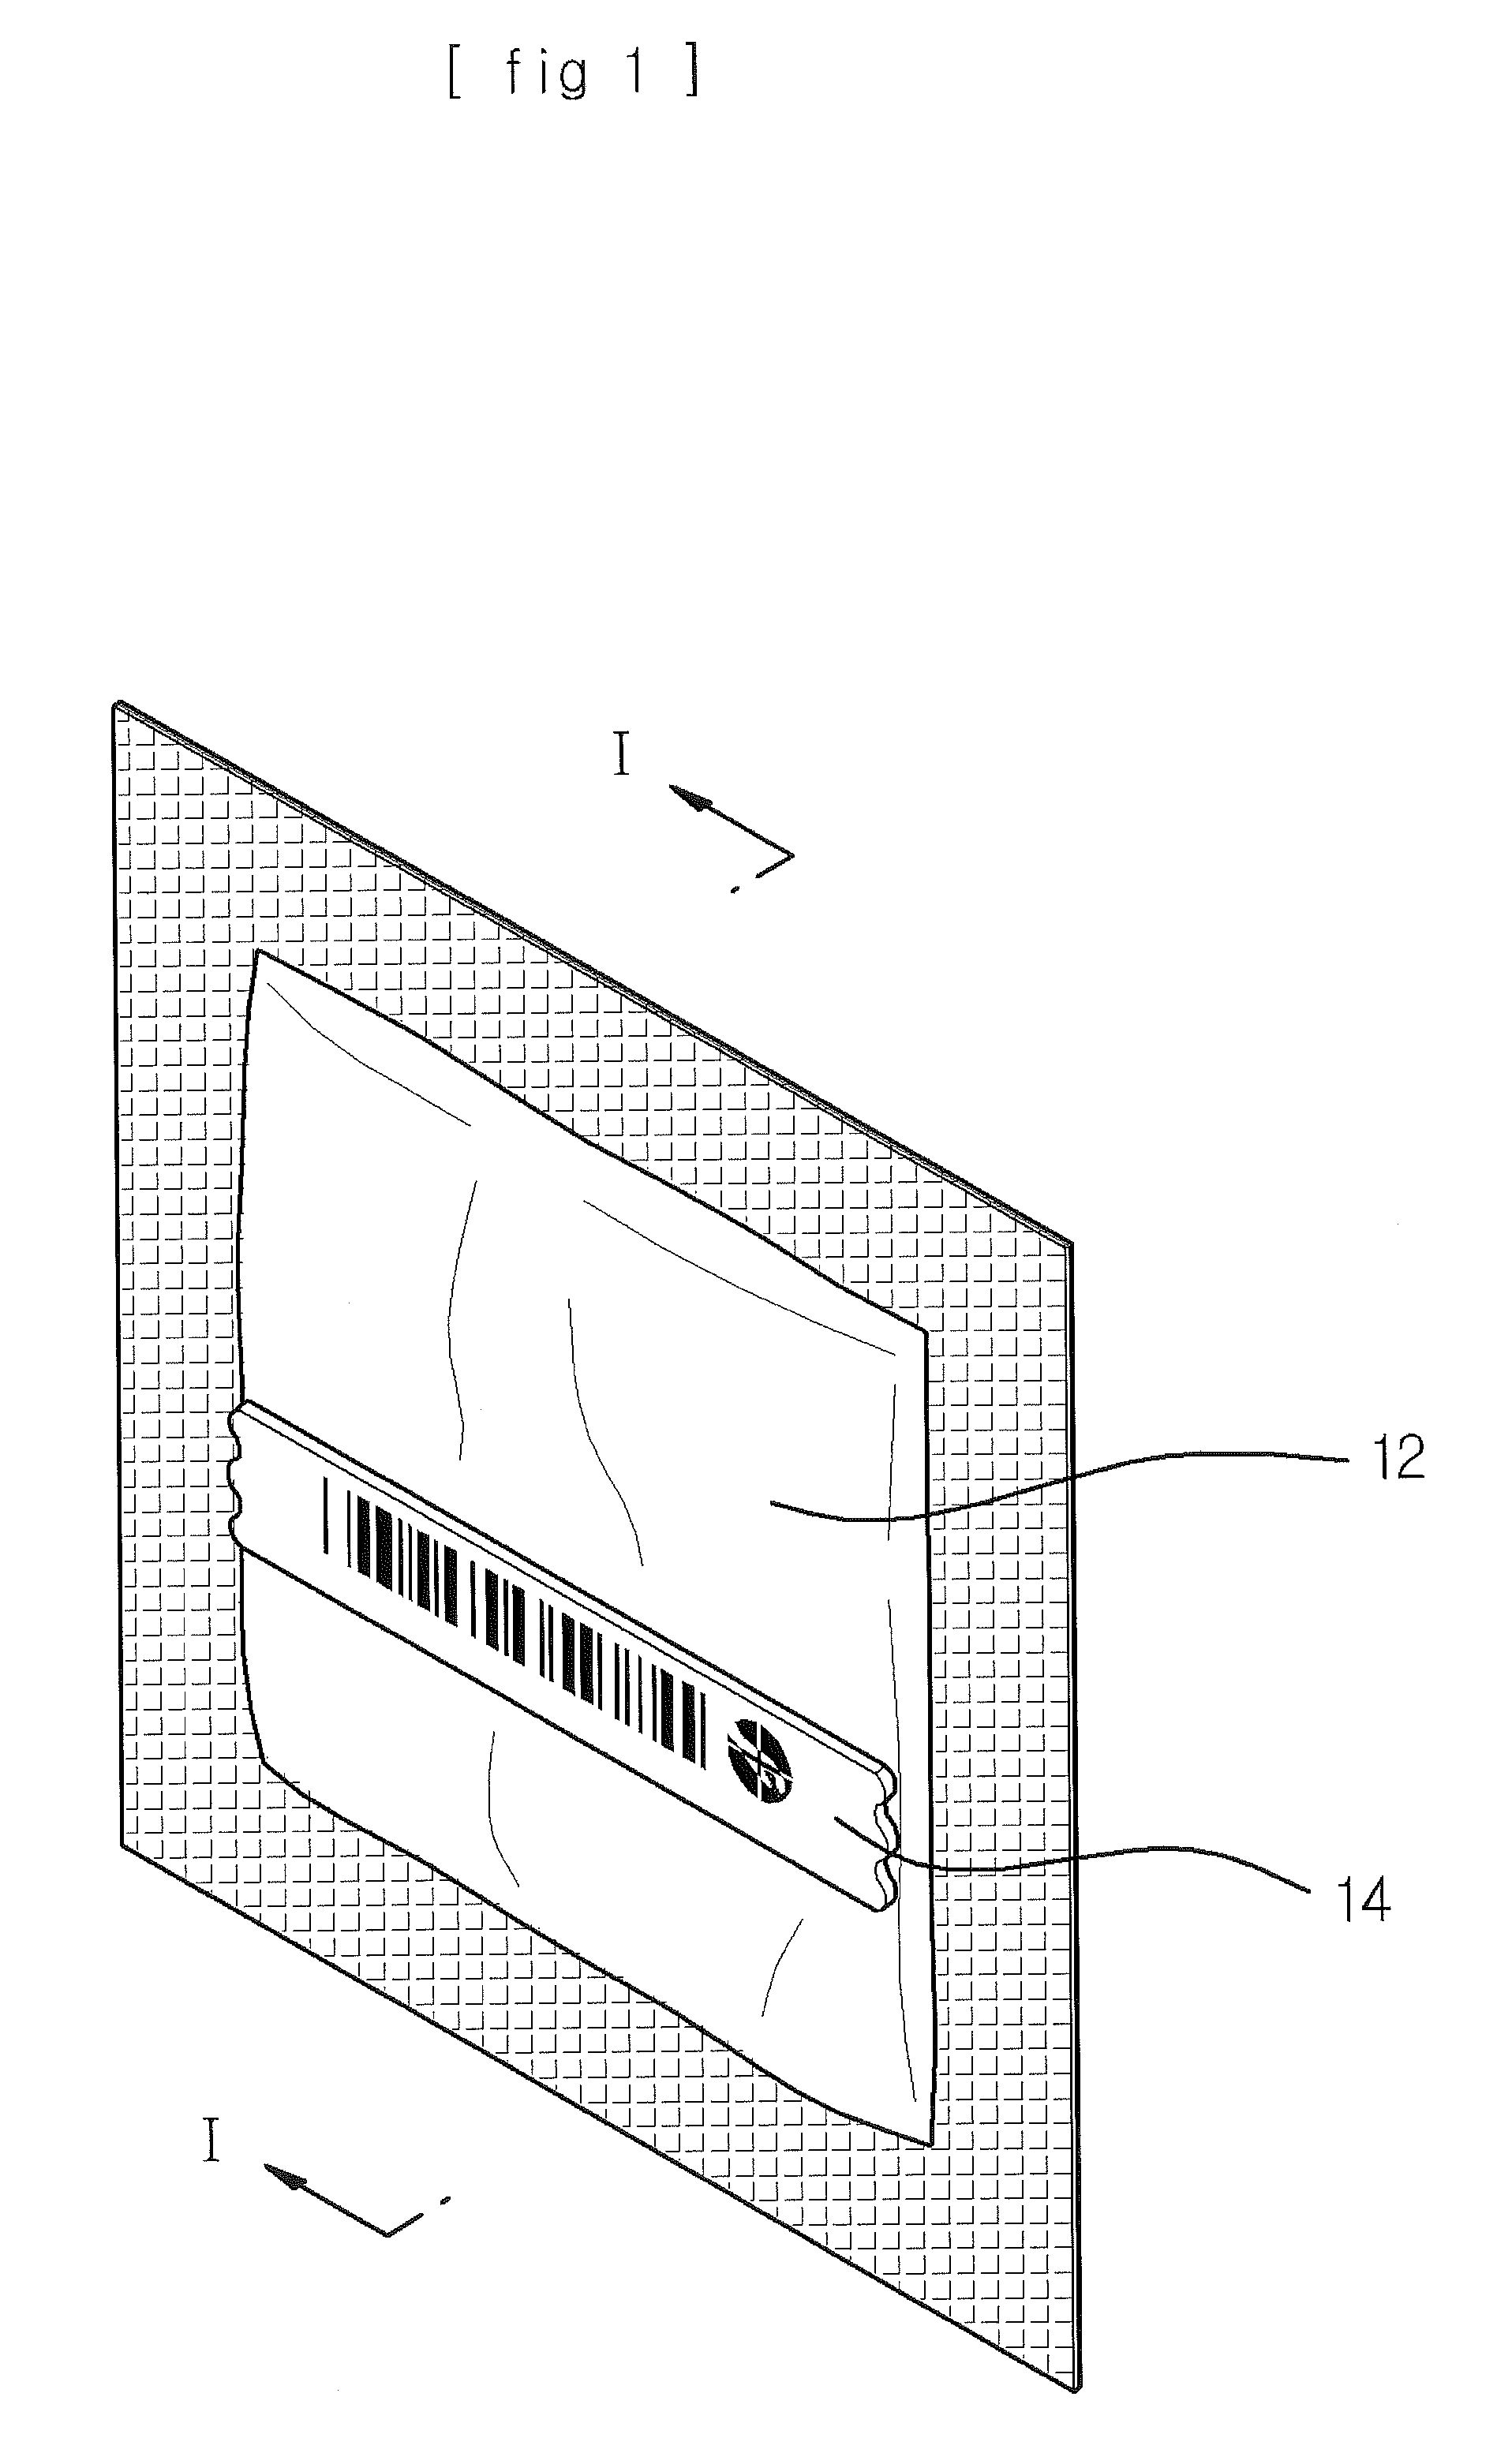 Packing structure including theft prevention electronic tag